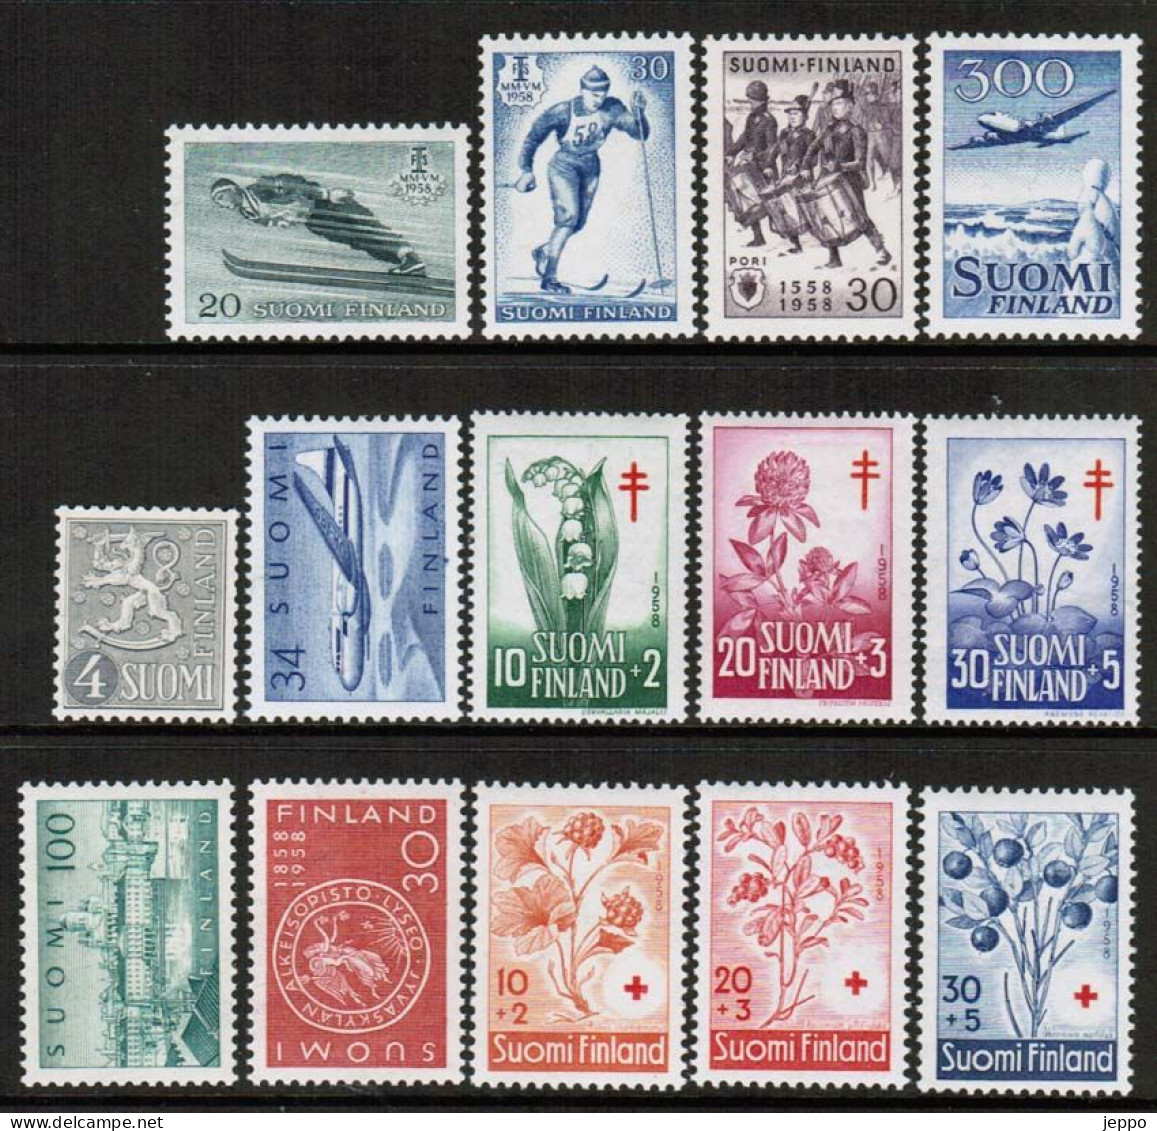 1958 Finland Complete Year Set MNH. - Años Completos